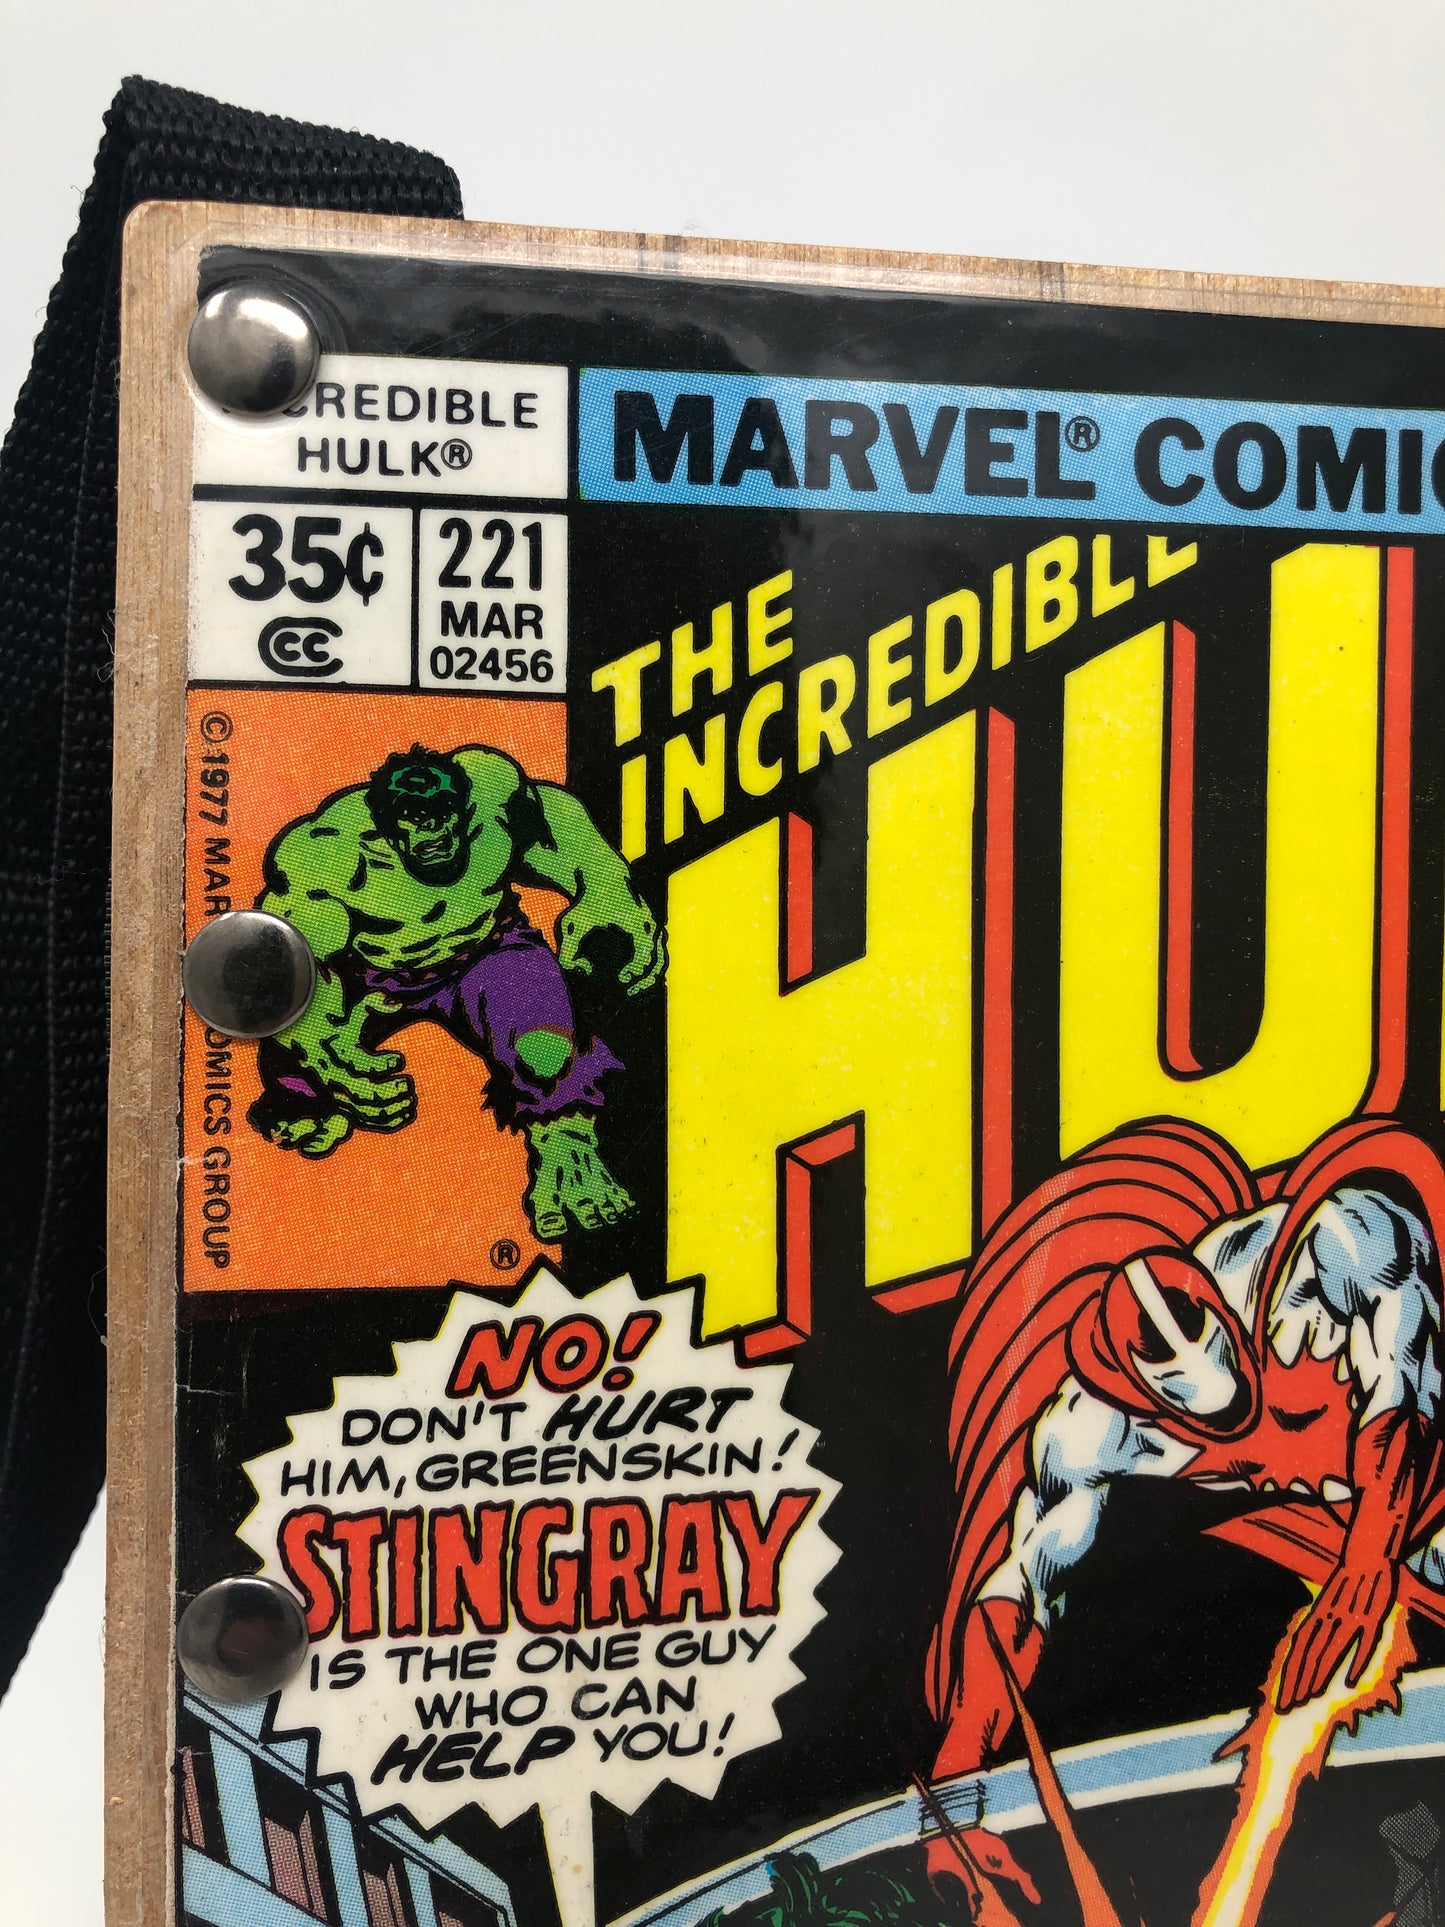 Clearance Corner Vintage Comic Book Purse - The Incredible Hulk March 1977